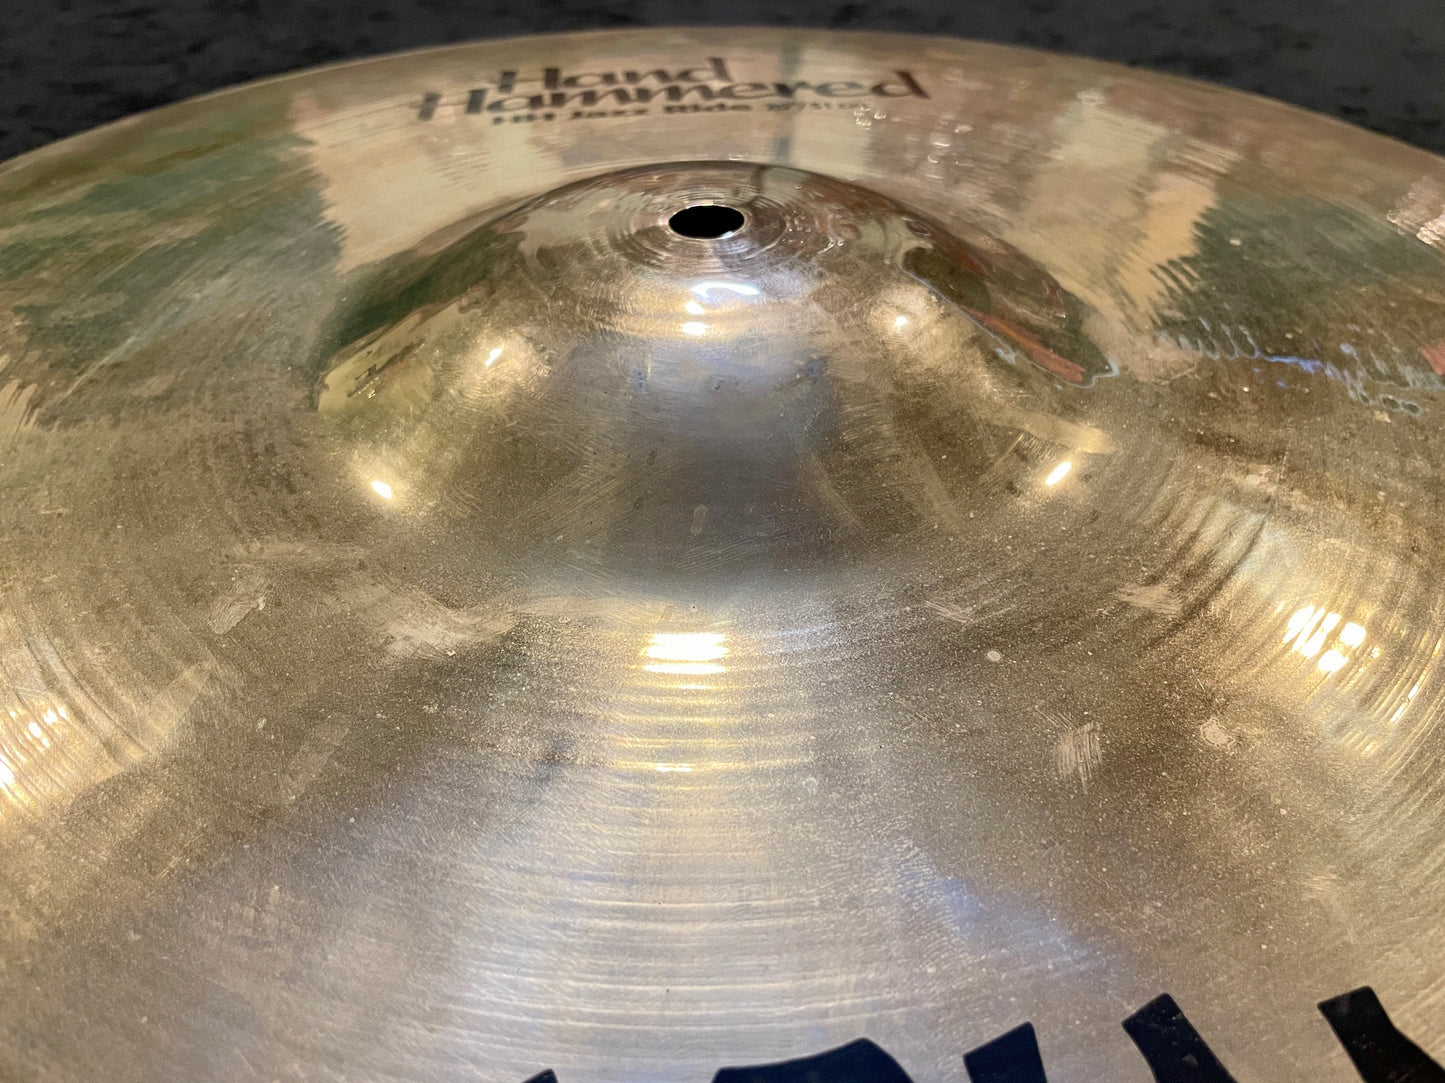 20" Sabian Hand Hammered HH Jazz Ride Cymbal 1864g *Video Demo*